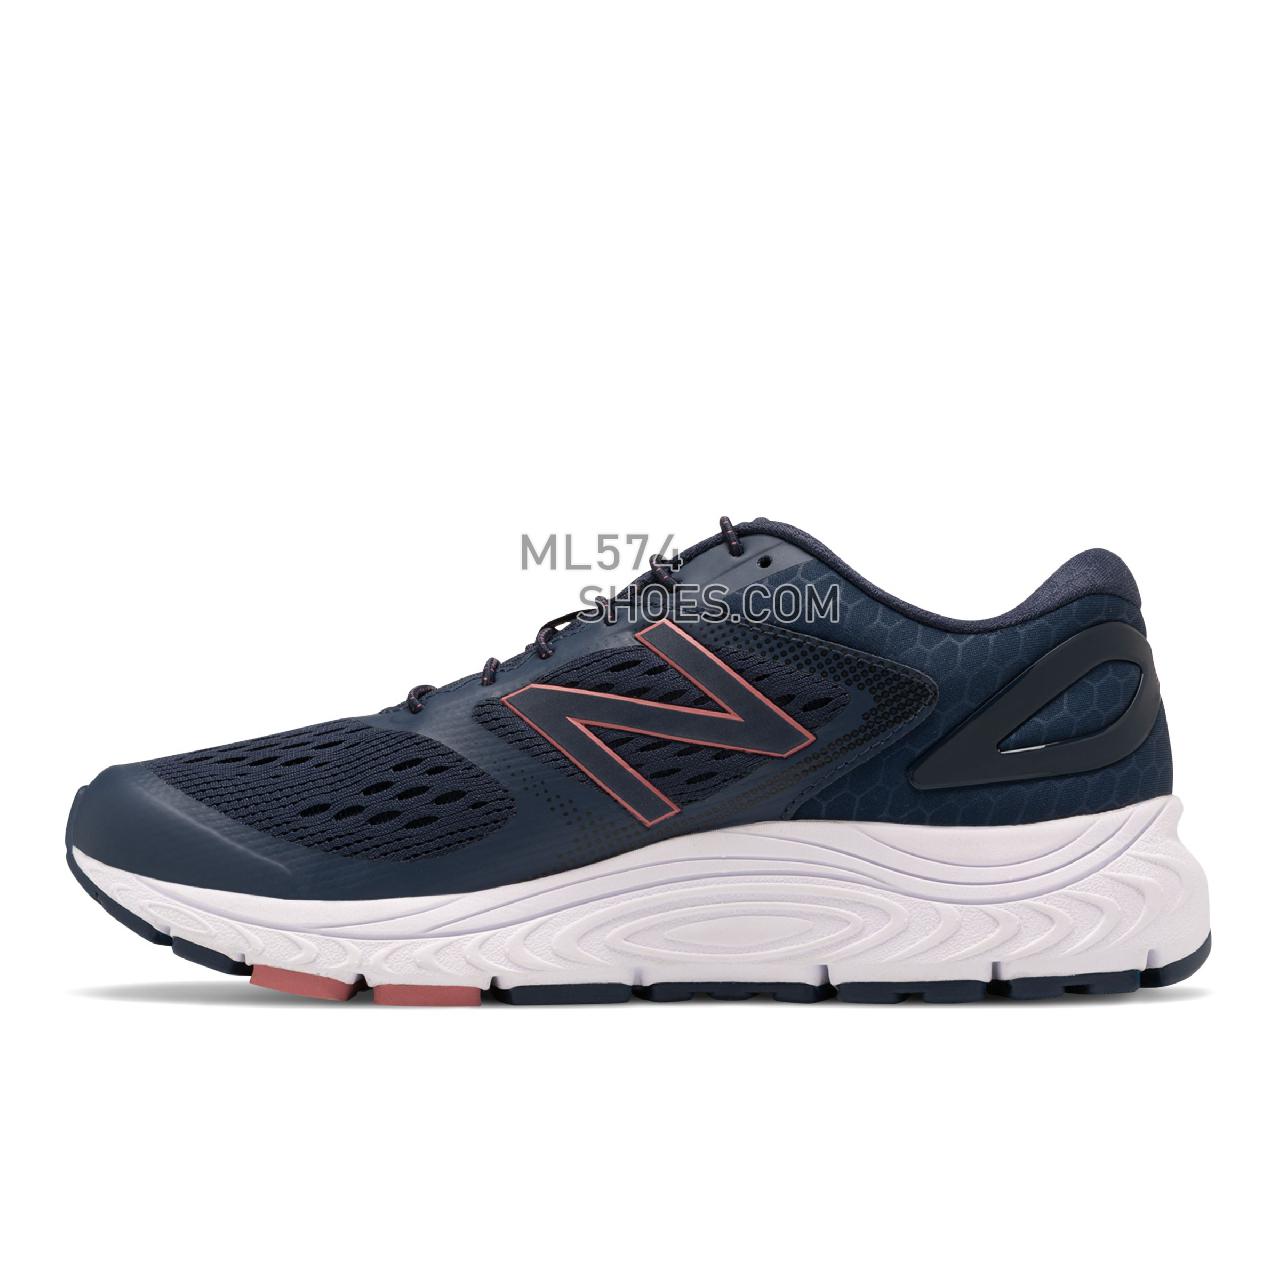 New Balance 840v4 - Women's Neutral Running - Natural Indigo with White and Off Road - W840BN4